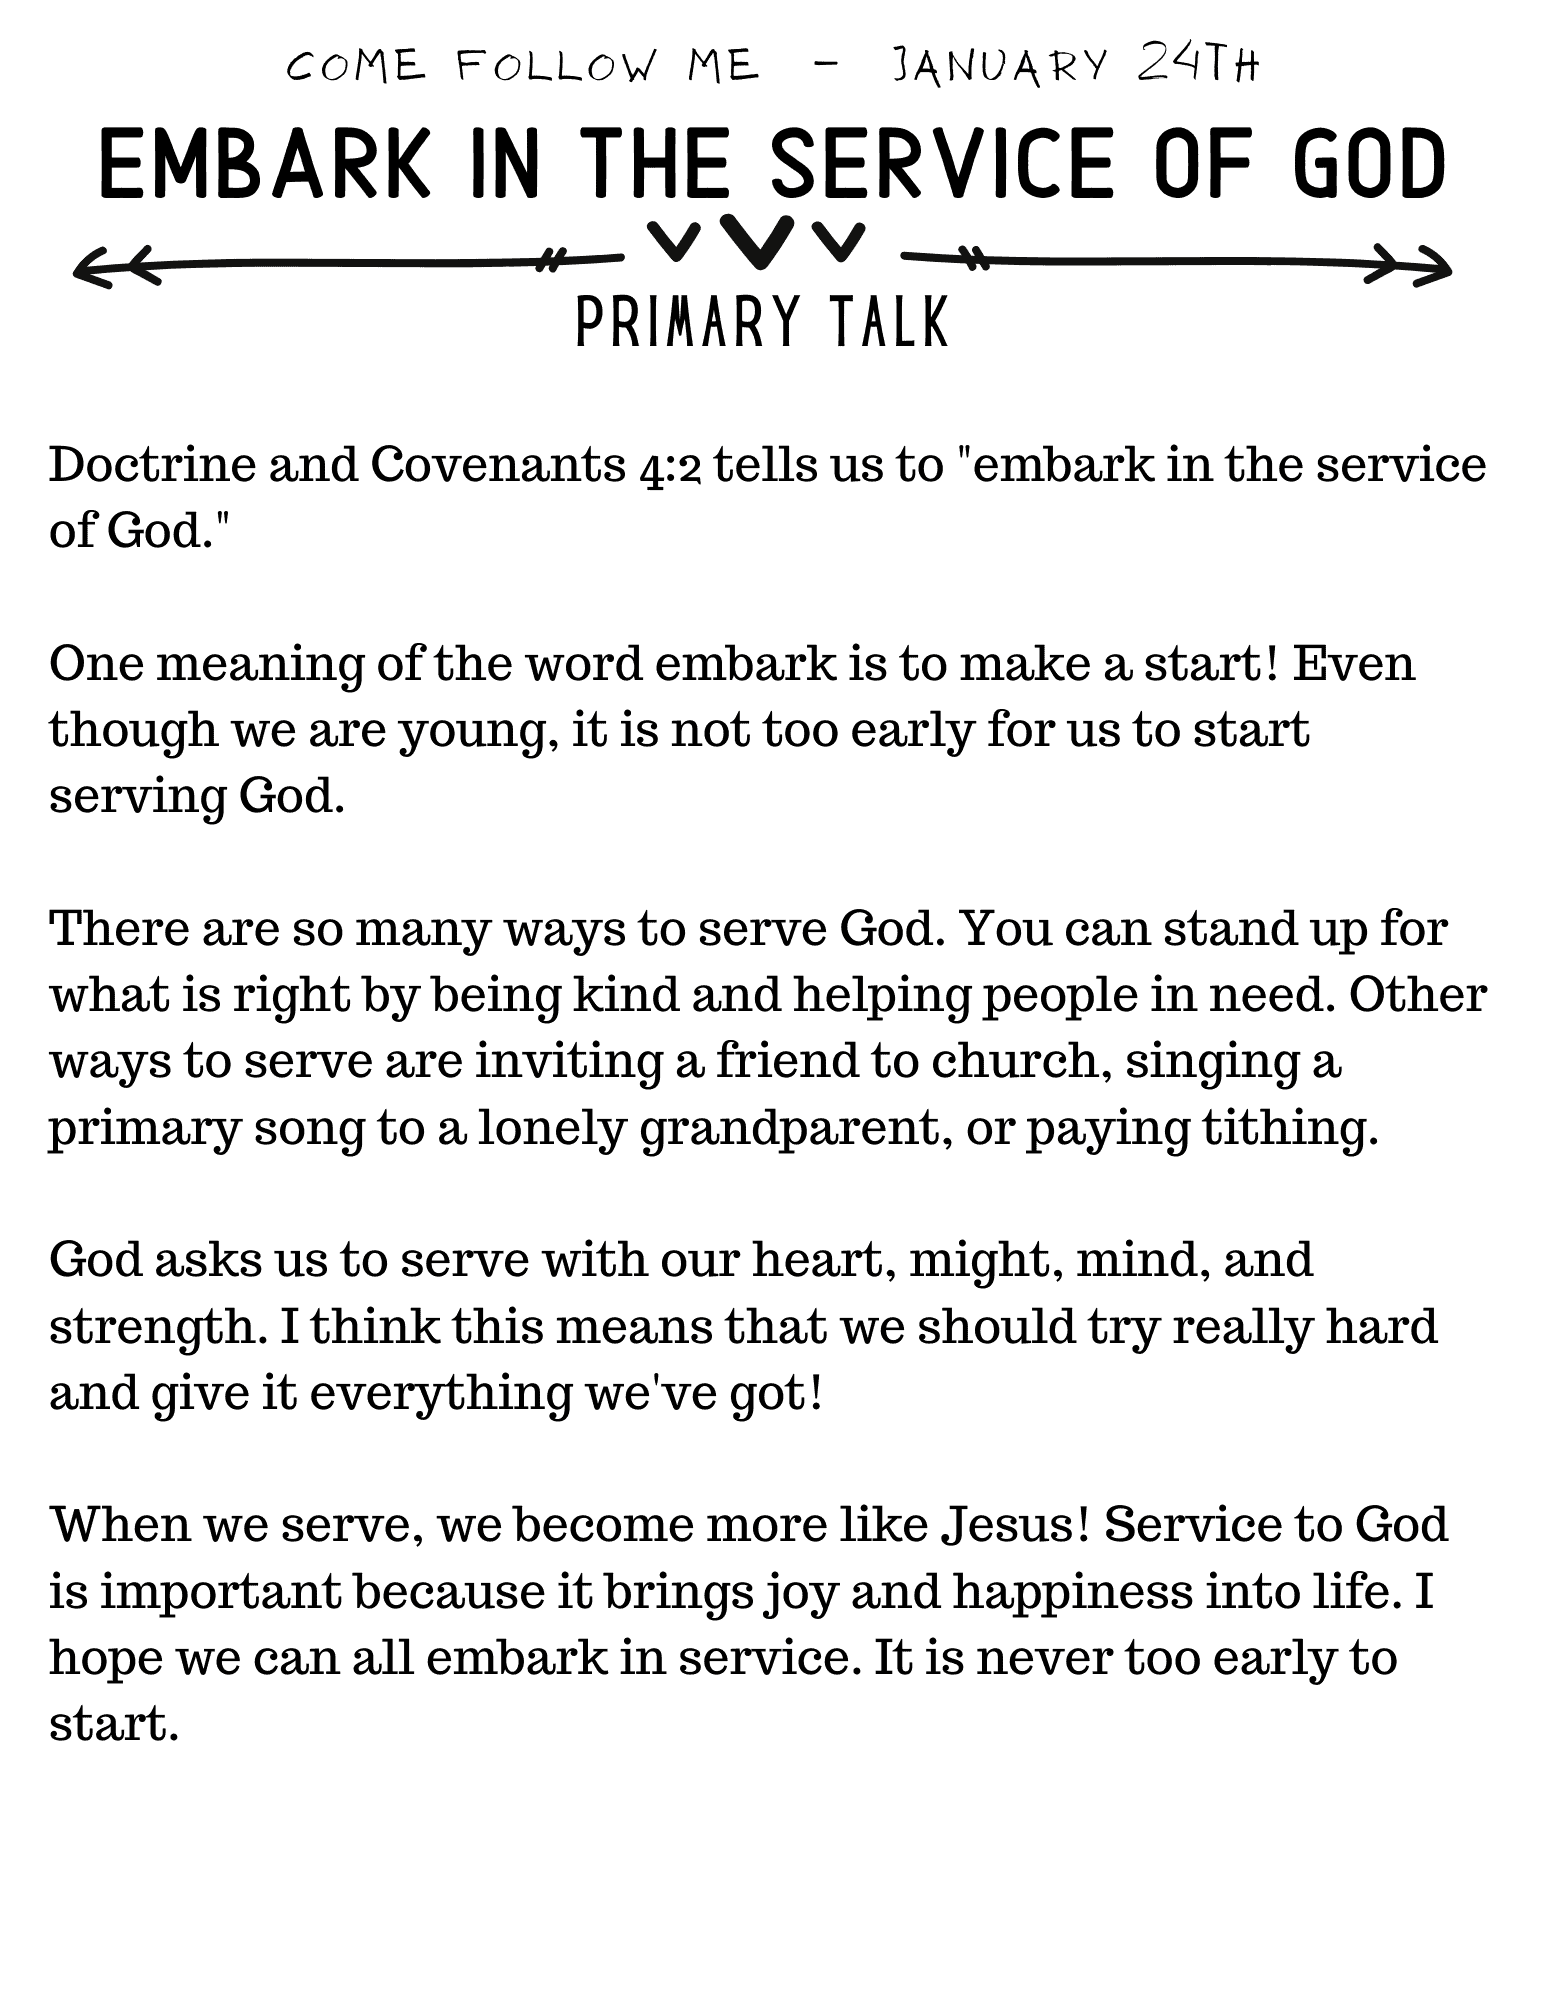 Template for Primary Talk on Embarking in the Service of God